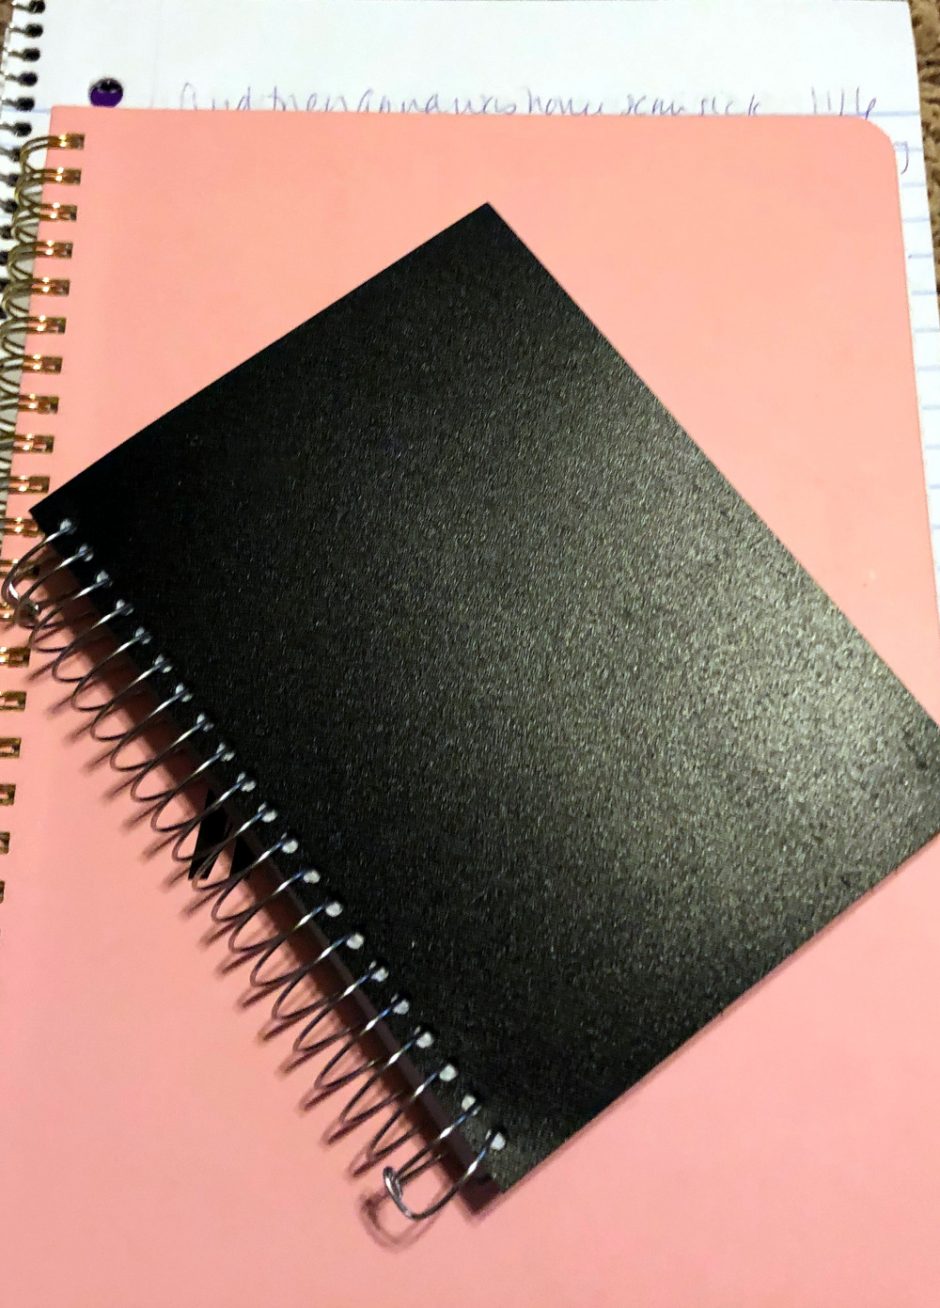 notebooks for brain dump and beyond